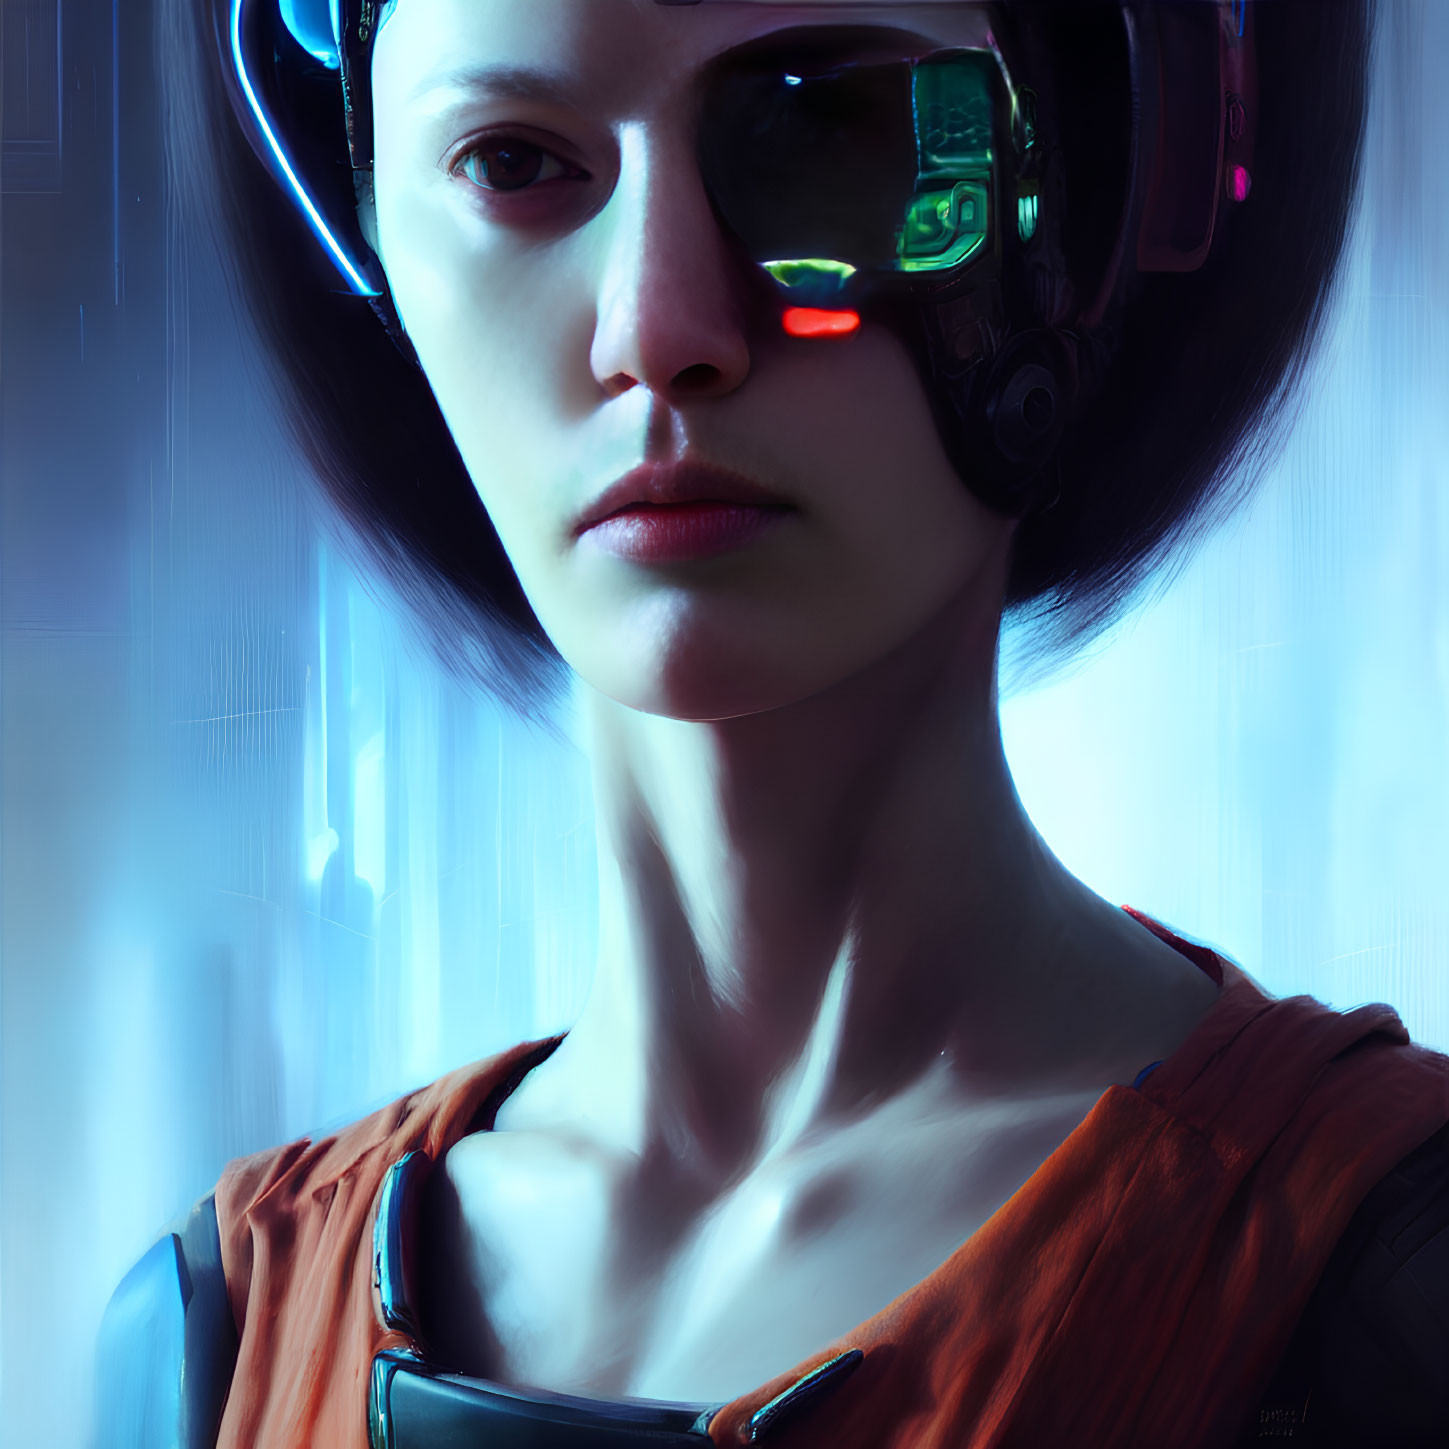 Futuristic digital painting of a woman with cybernetic enhancements